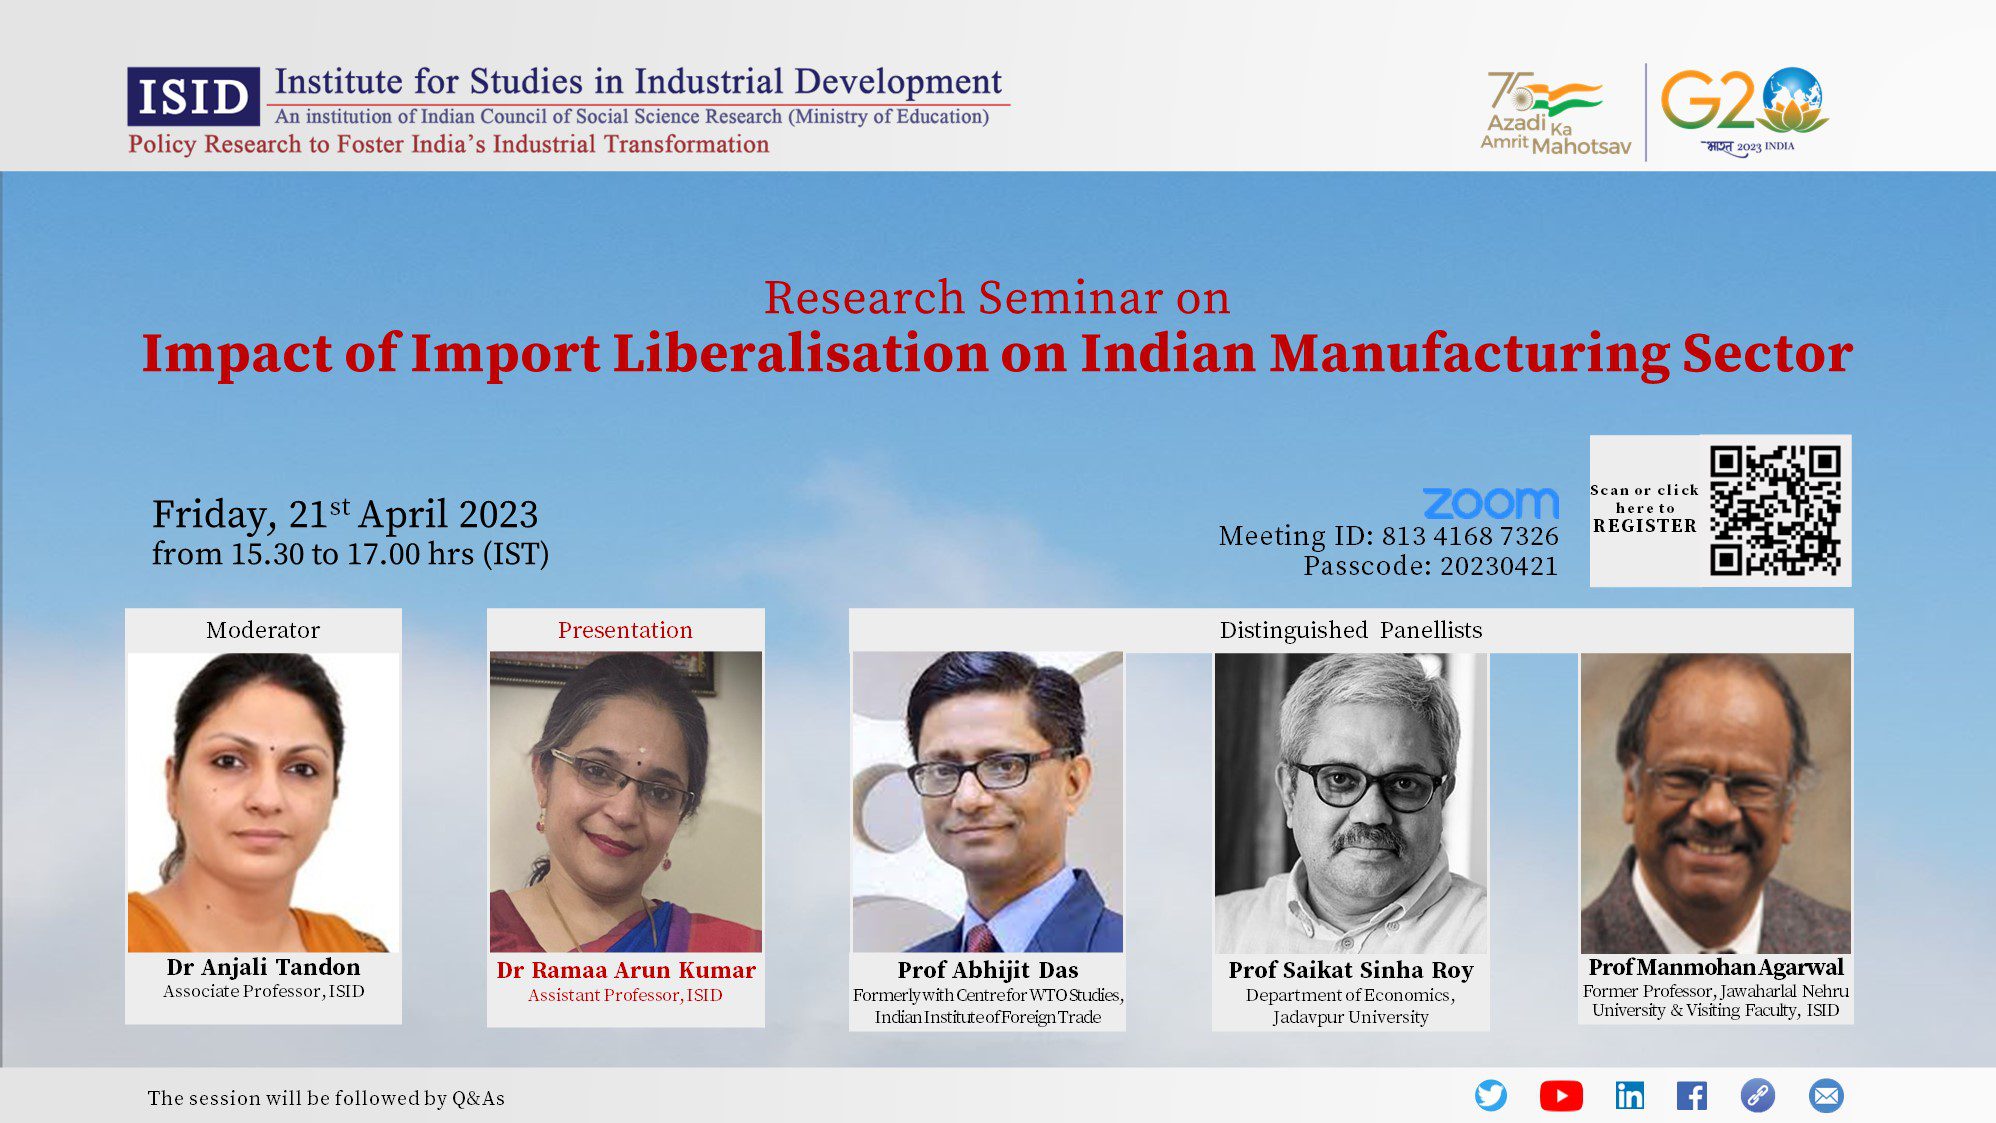 Research Seminar on Impact of Import Liberalisation on Indian Manufacturing Sector